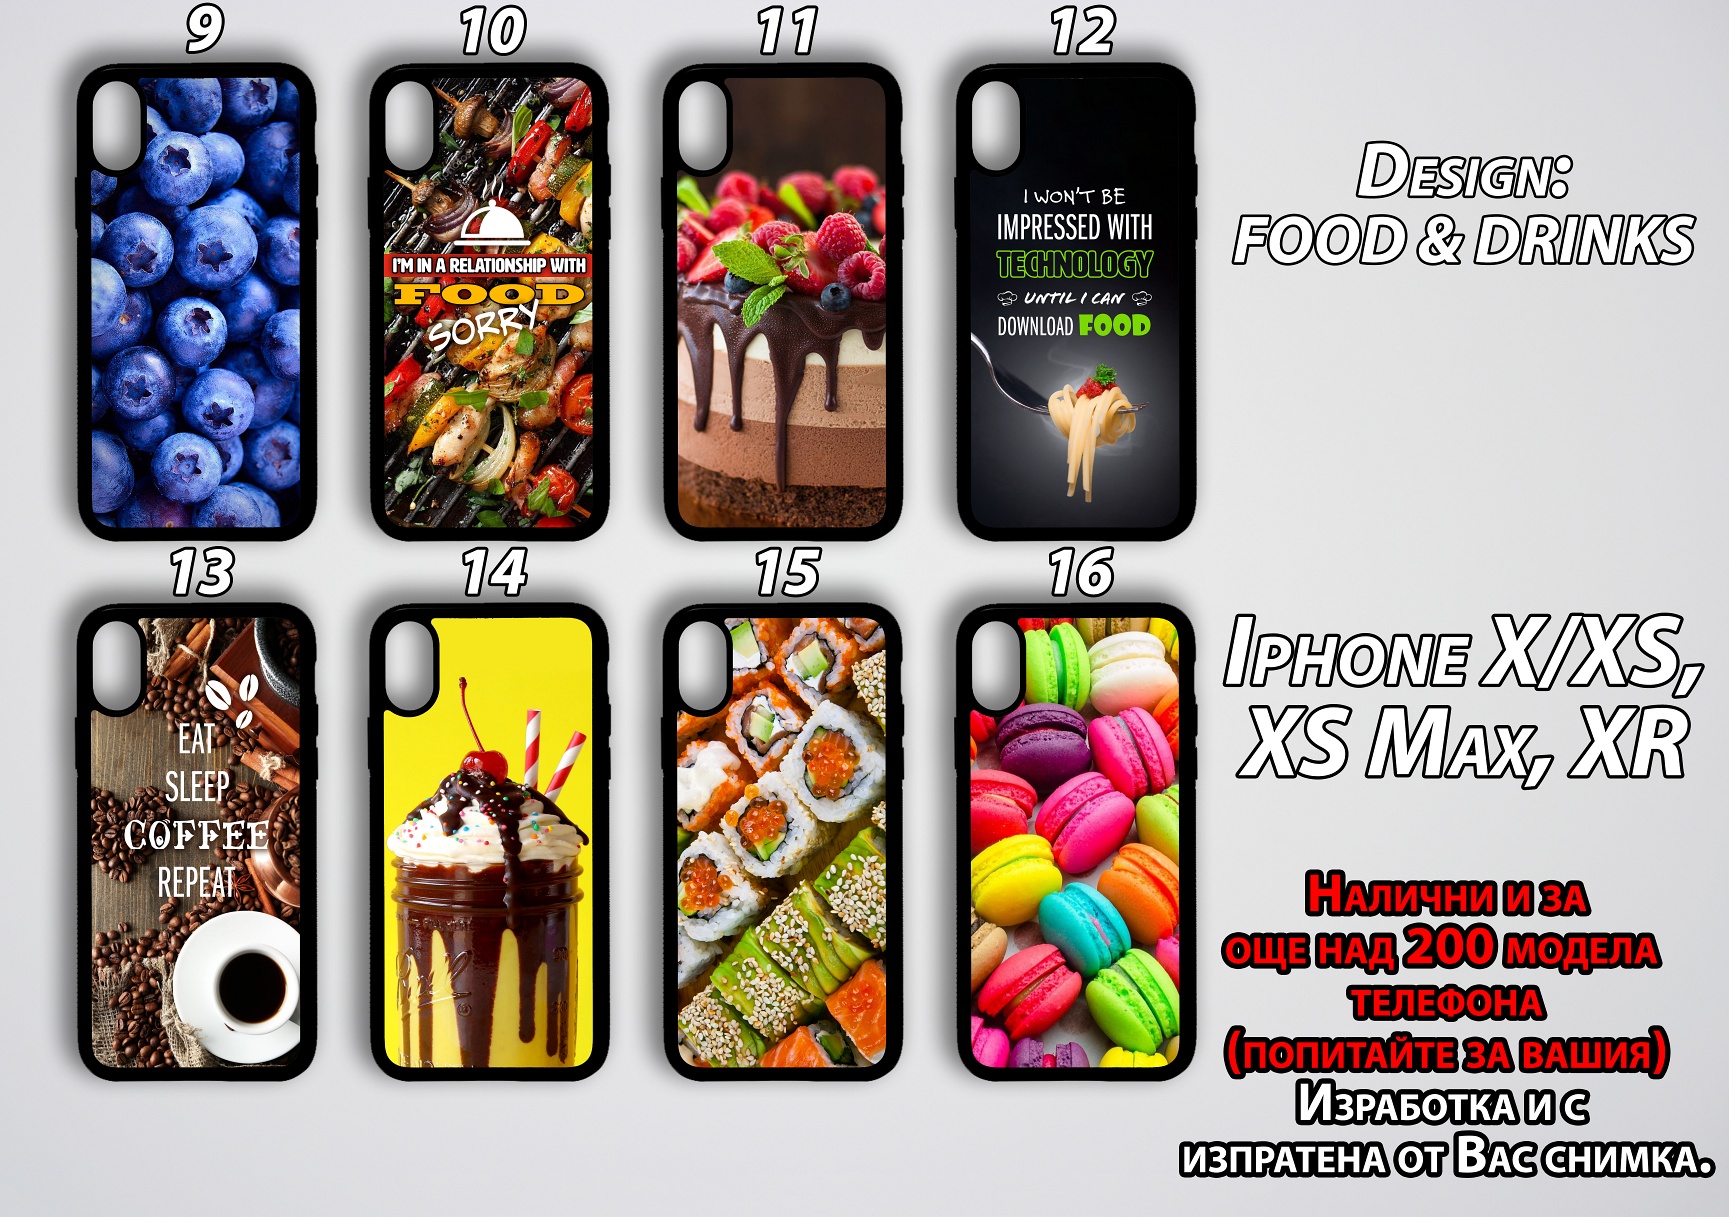 mobile phone cases NEW-Food-Drinks 9